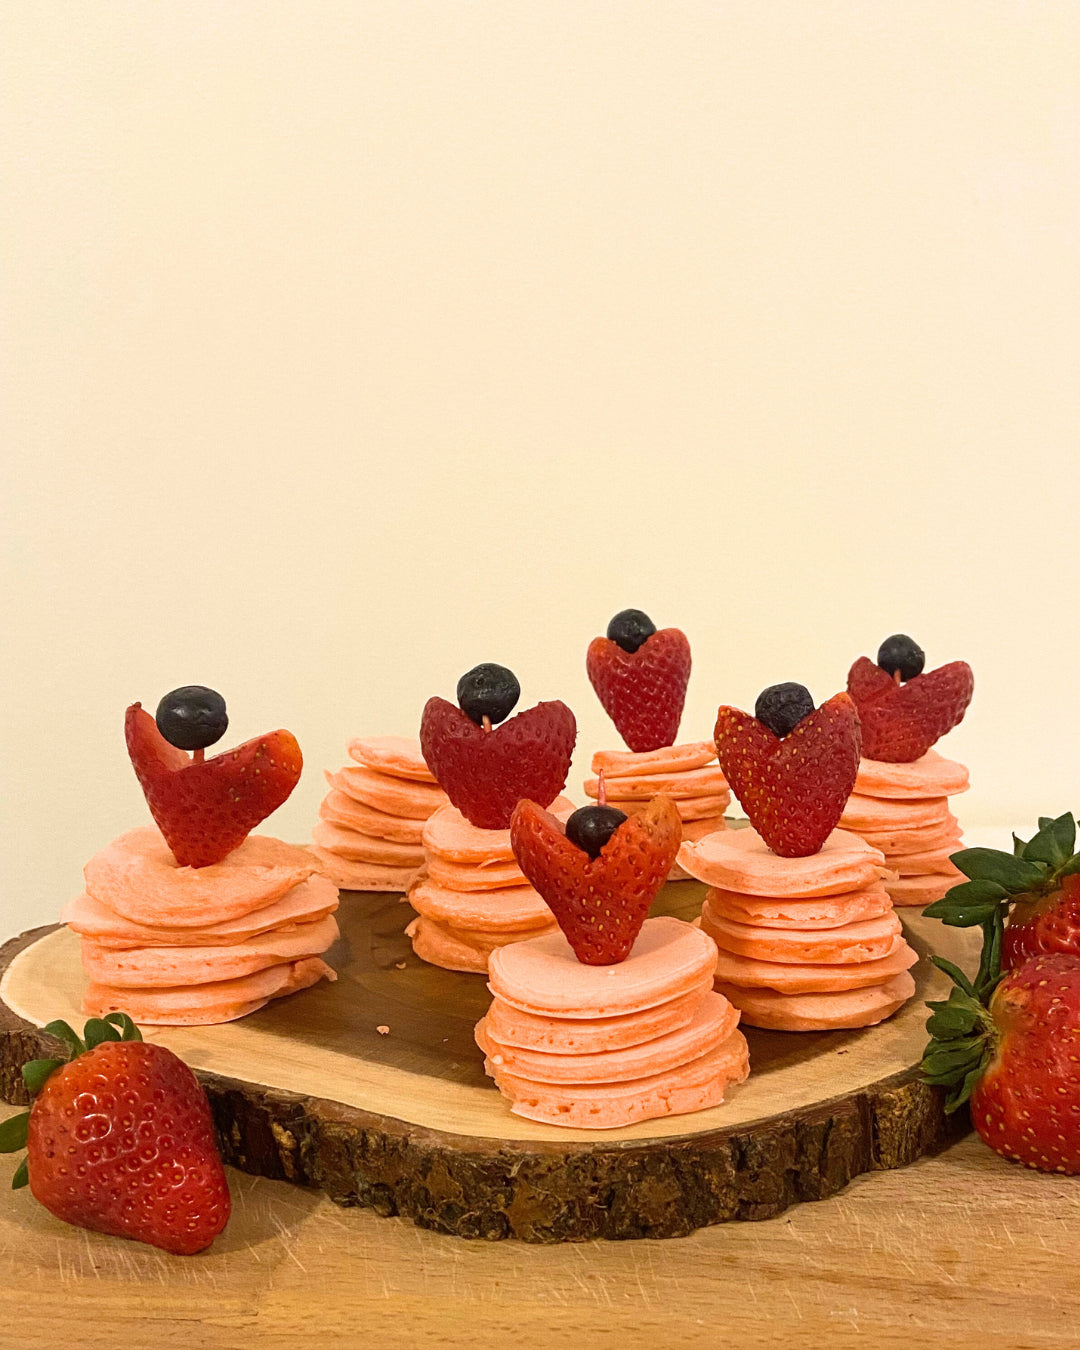 WiO Mini Pancake Stacks with a strawberry on top